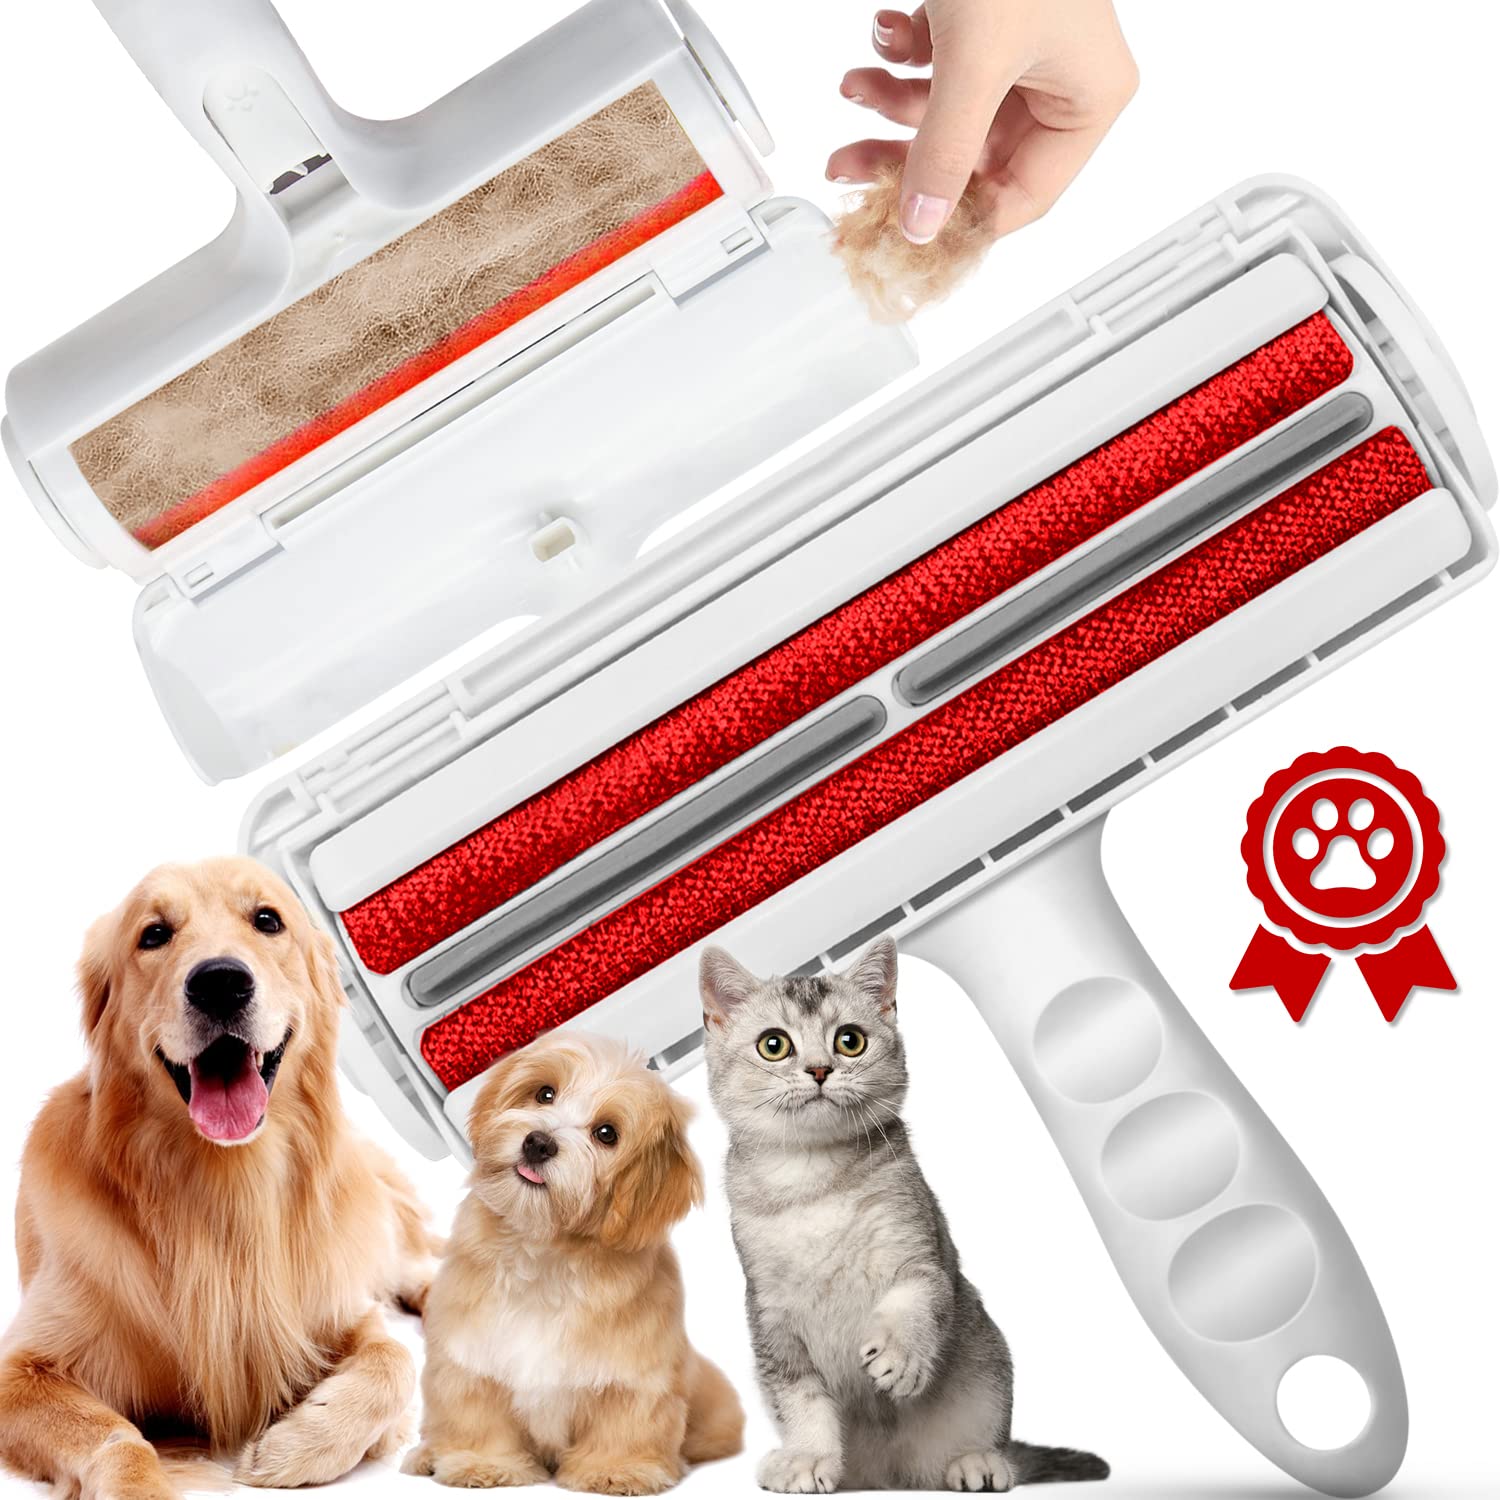 WOOTONG Pet Hair Remover Roller - Dog & Cat Fur Remover with Self-Cleaning Base - Efficient Animal Hair Removal Tool Cat Dog Hai